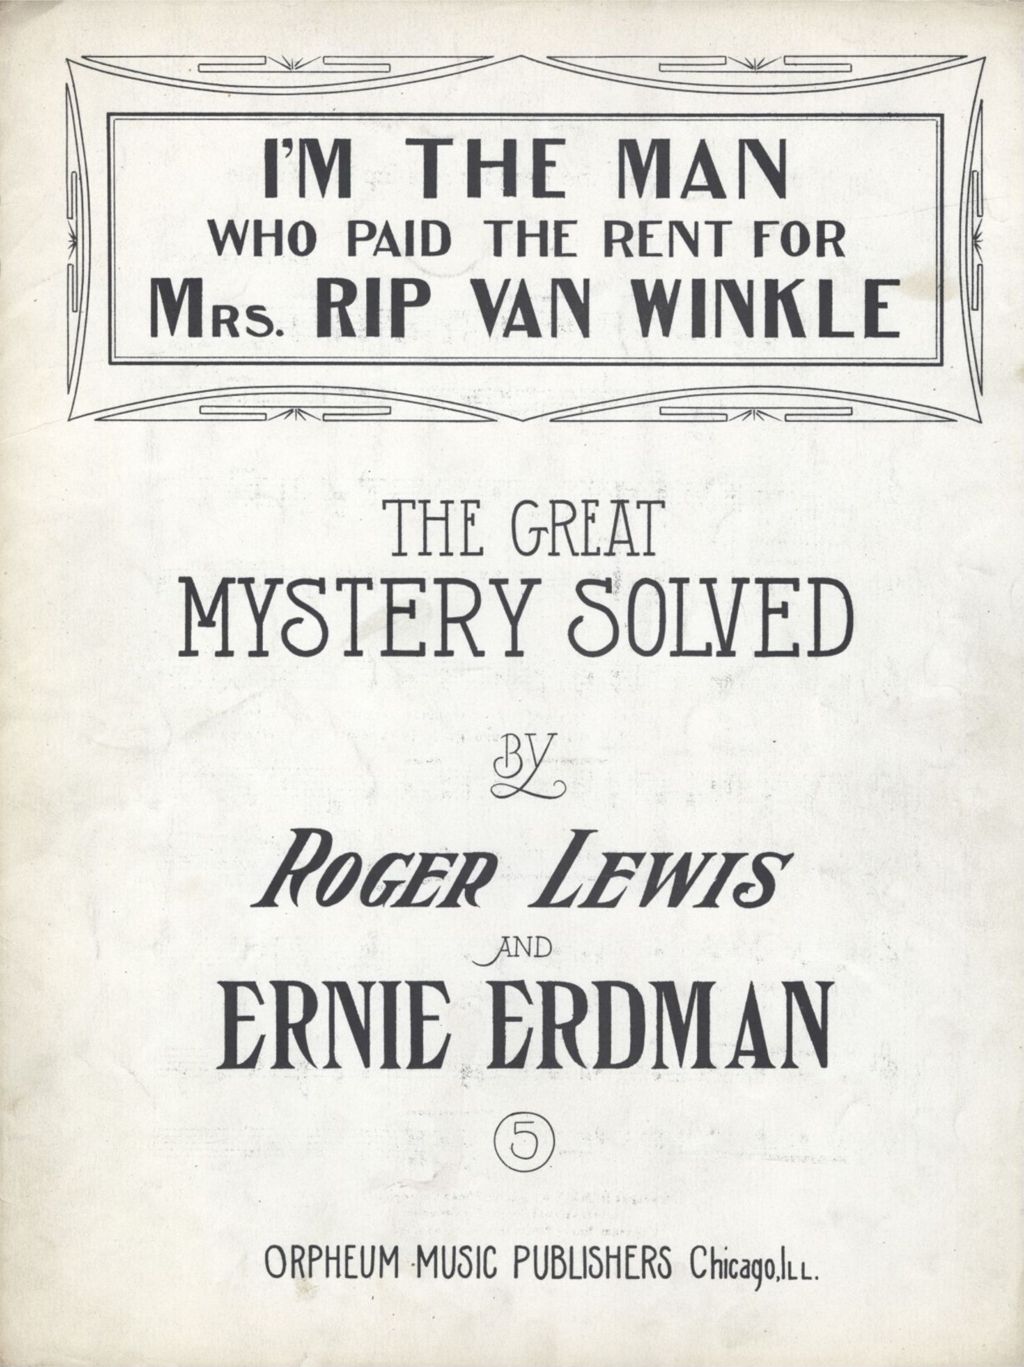 I'm the Man Who Paid the Rent for Mrs. Rip Van Winkle